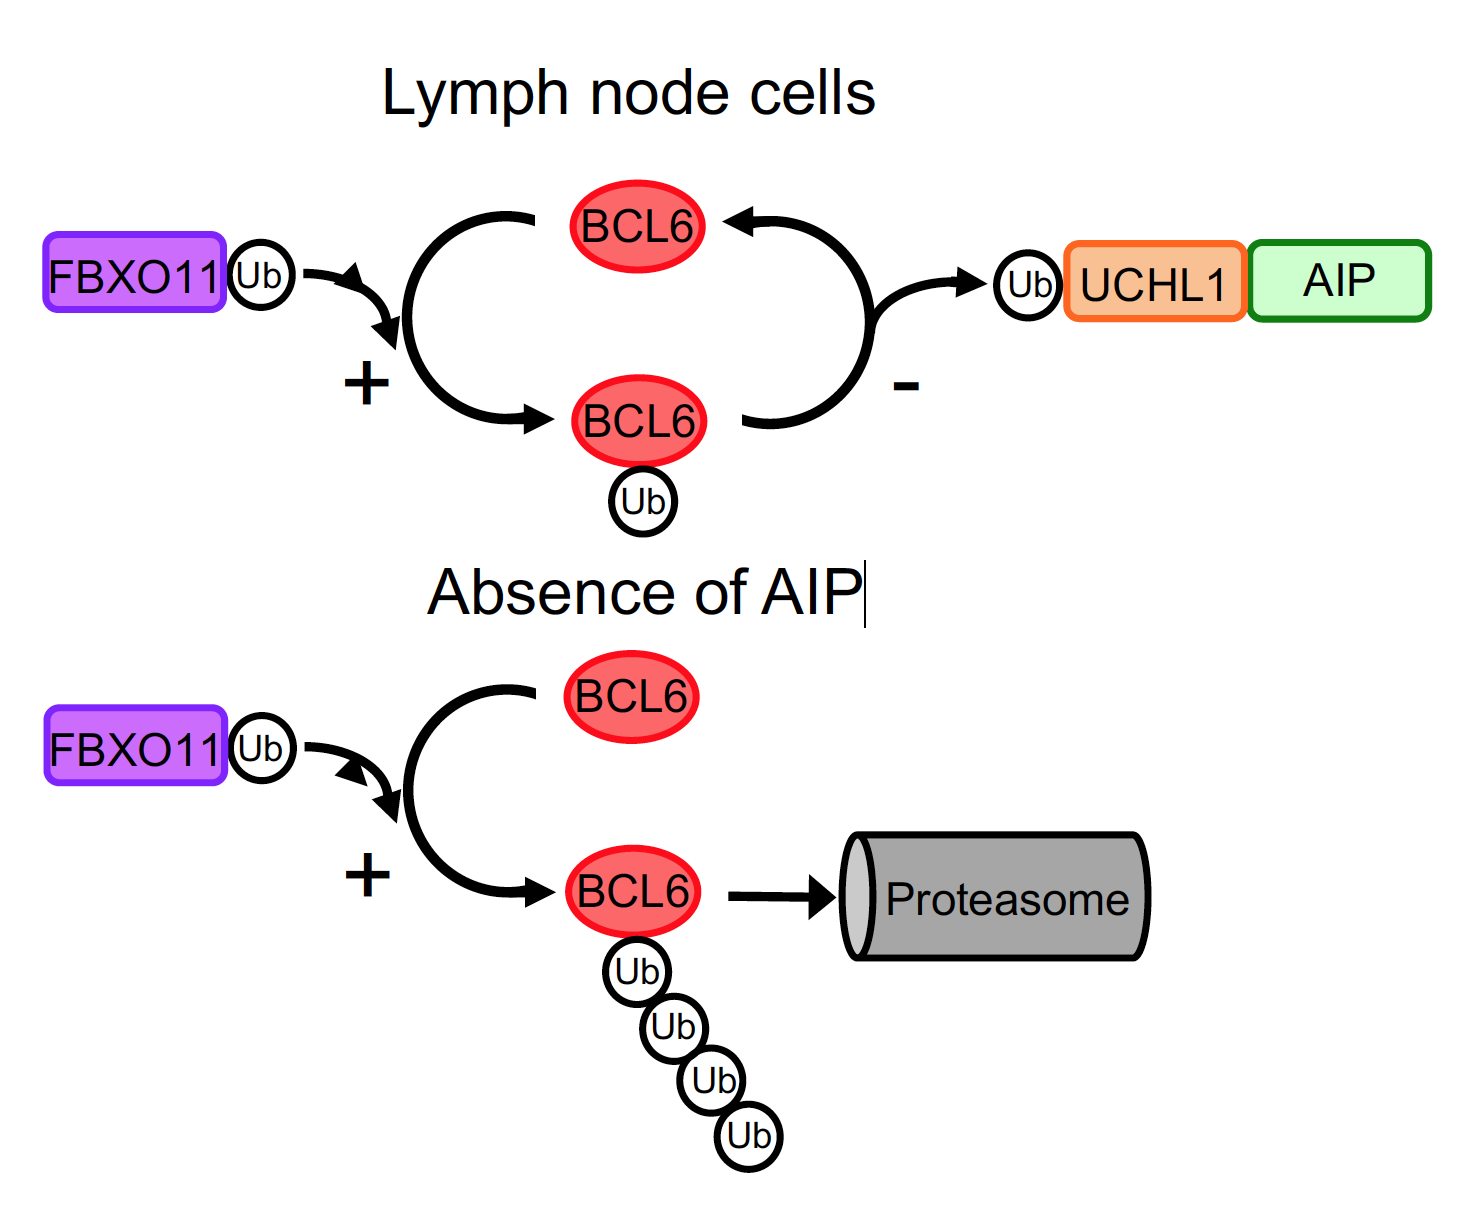 BCL6 – protein supporting lymphoma growth FBXO11 – protein attached ubiquitin chain to BCL6 Ub- ubiquitin molecules forming a chain UCLH1 – protein which cuts off ubiquitin chain from BCL6 Proteasome - the cell system to degrade proteins